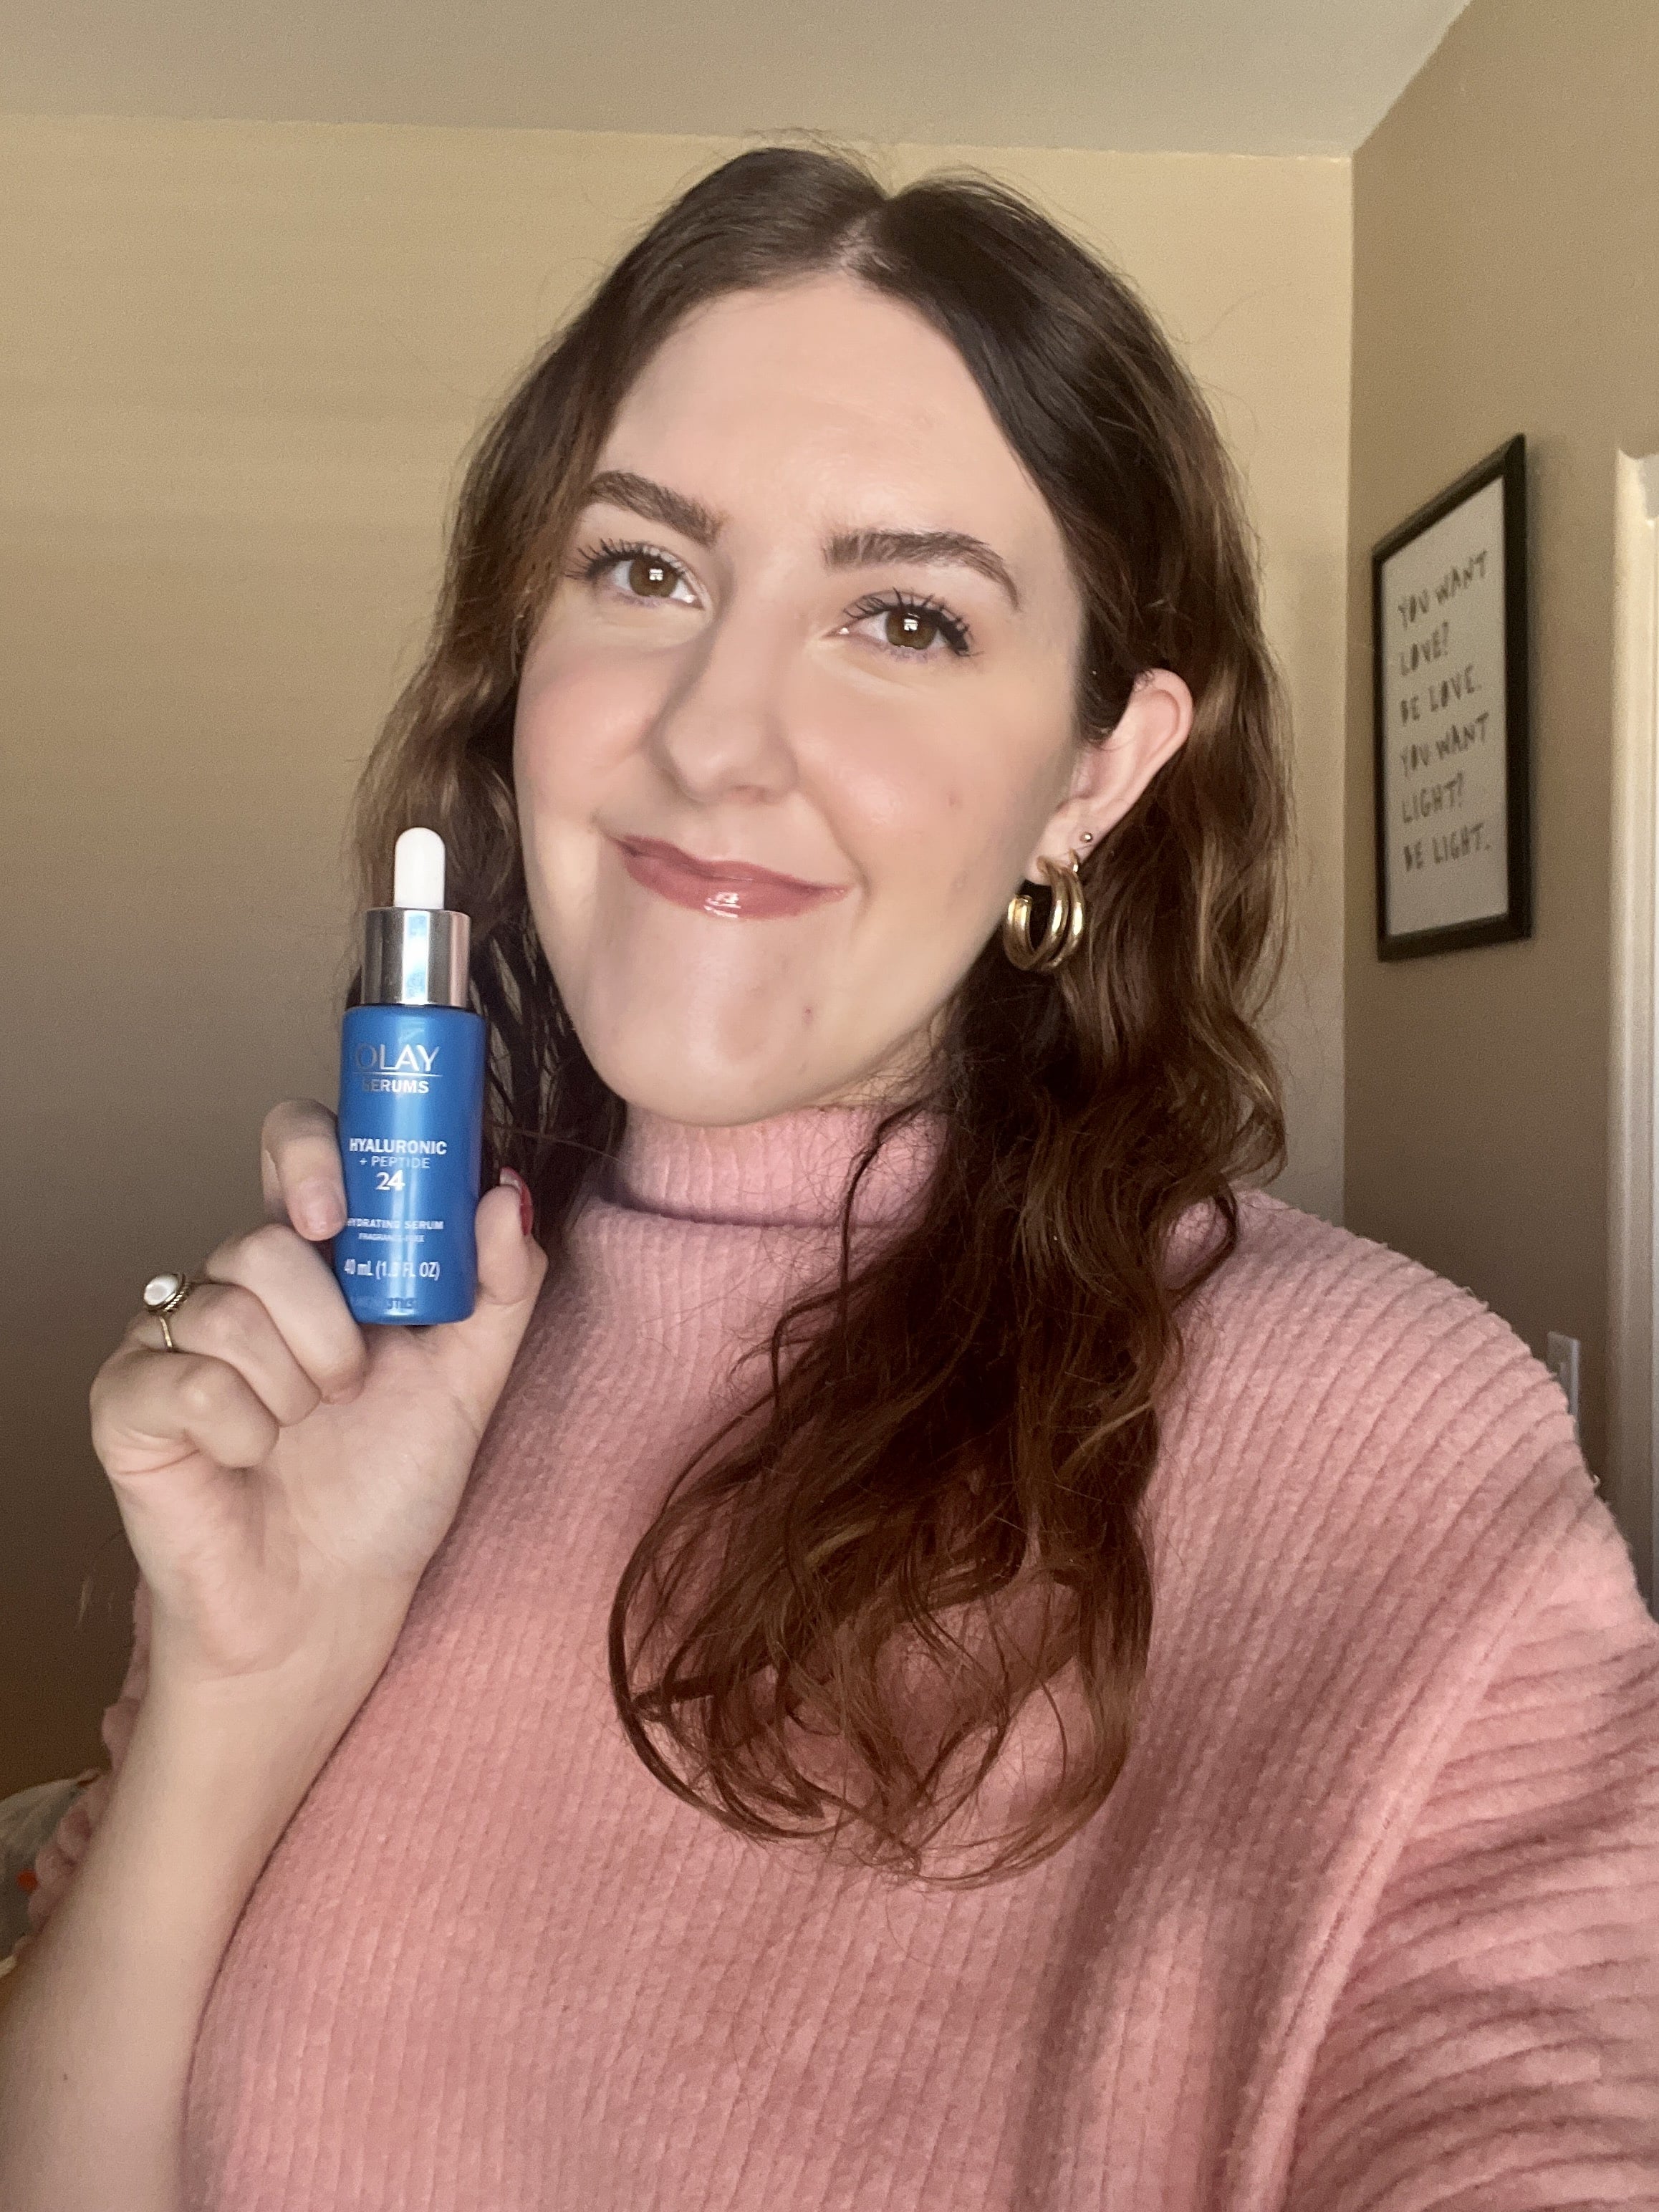 Olay Hyaluronic + Peptide 24 Serum Review | POPSUGAR Beauty